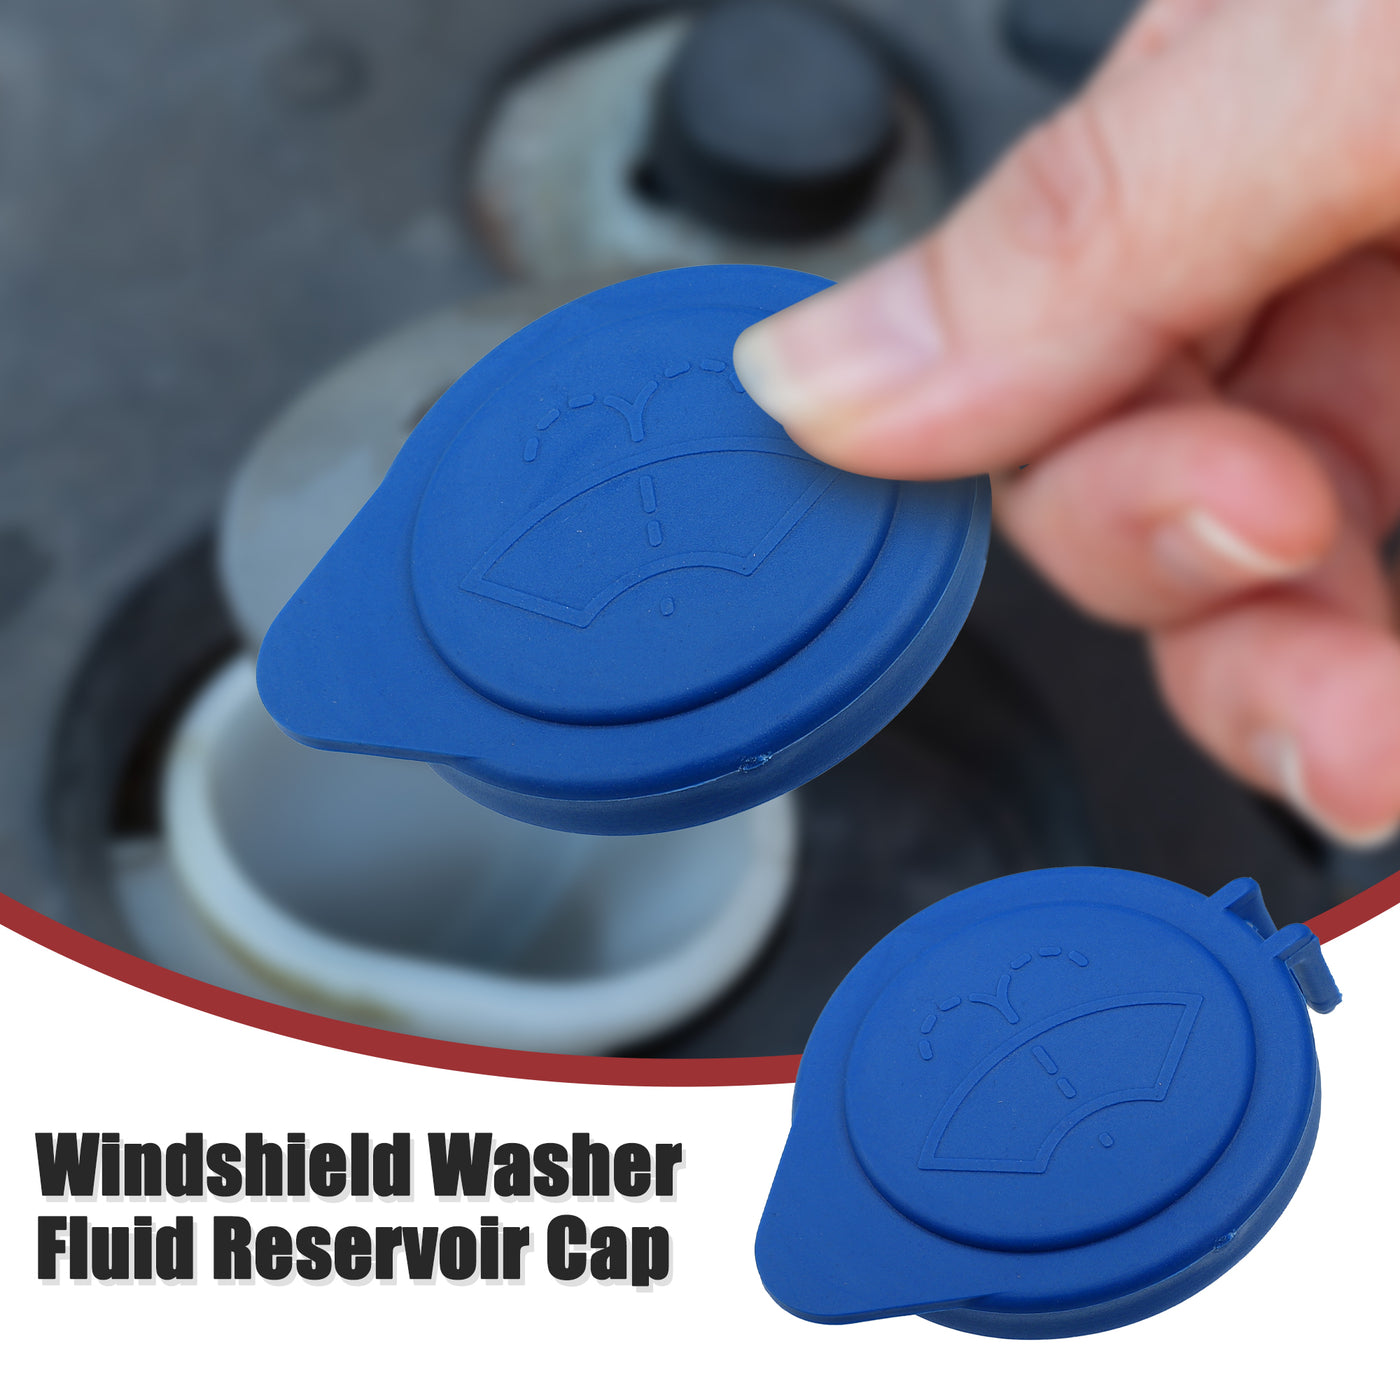 ACROPIX Windshield Washer Fluid Reservoir Bottle Tank Cap Fit for Ford Focus 2012-2018 for Ford Transit Connect 2018-2021 - Pack of 1 Blue